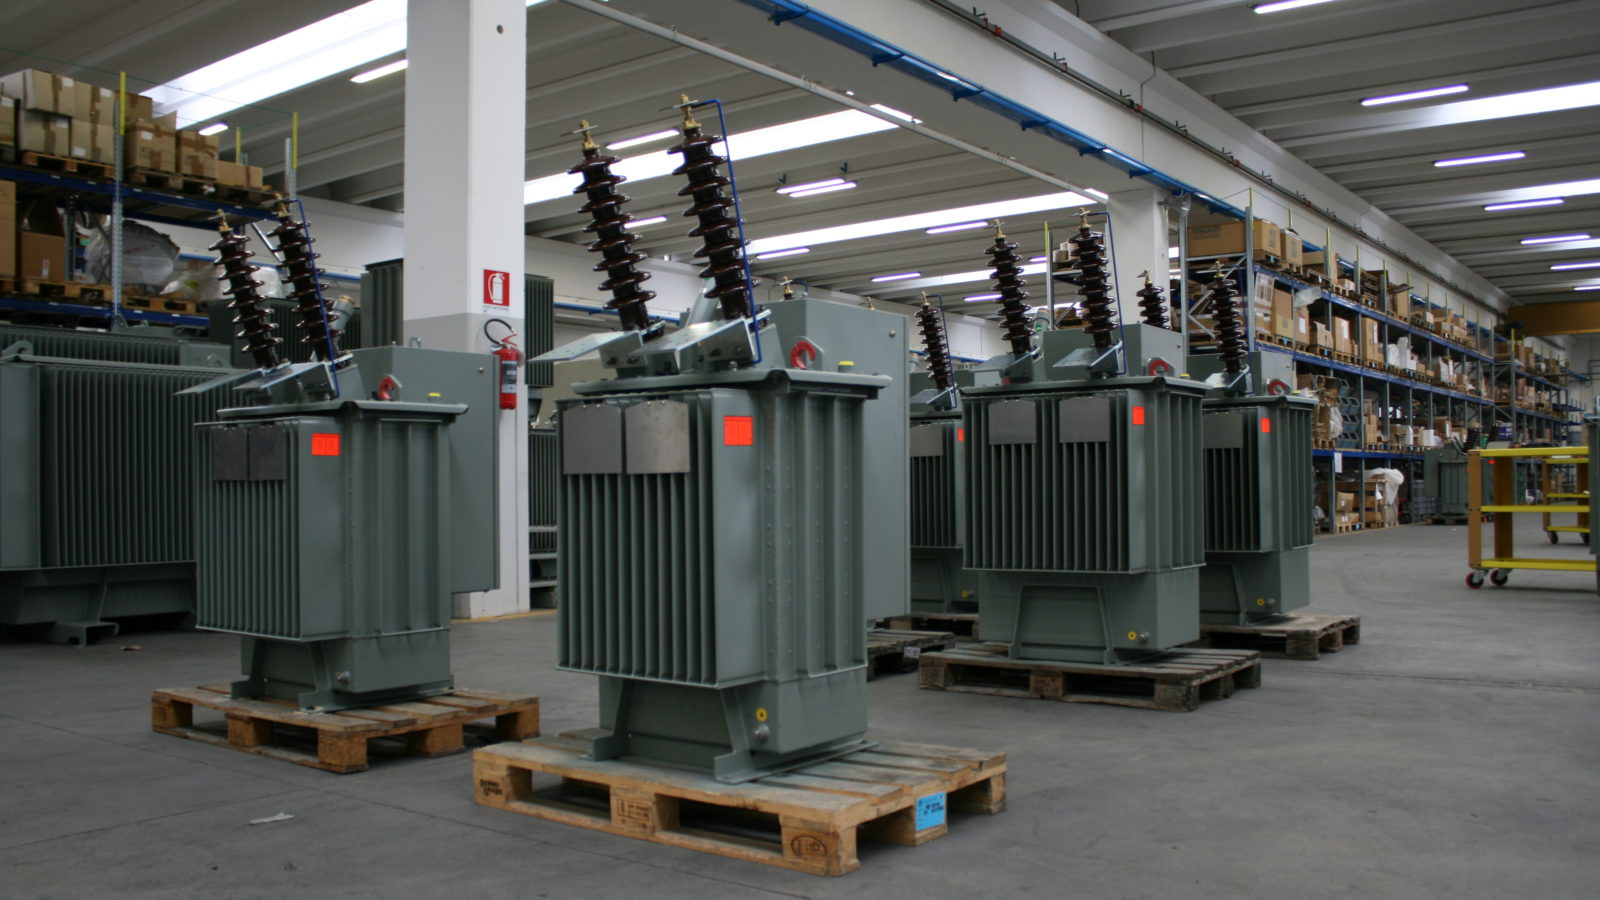 Single-phase transformers for Railway